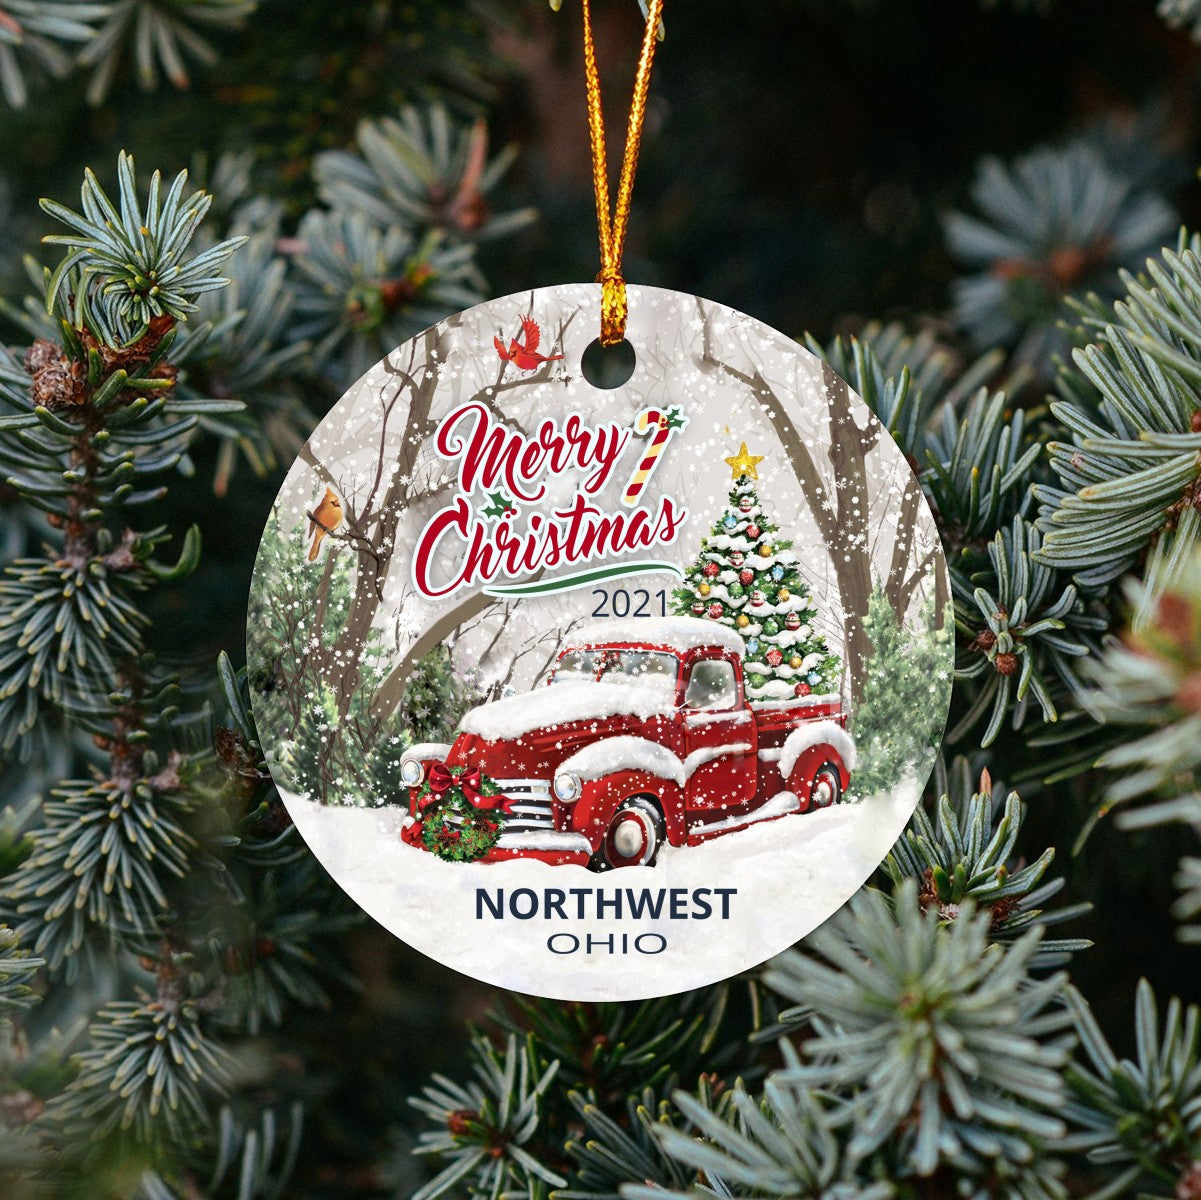 Christmas Tree Ornaments Northwest - Ornament With Name City, State Northwest Ohio OH Ornament - Red Truck Xmas Ornaments 3'' Plastic Gift For Family, Friend And Housewarming